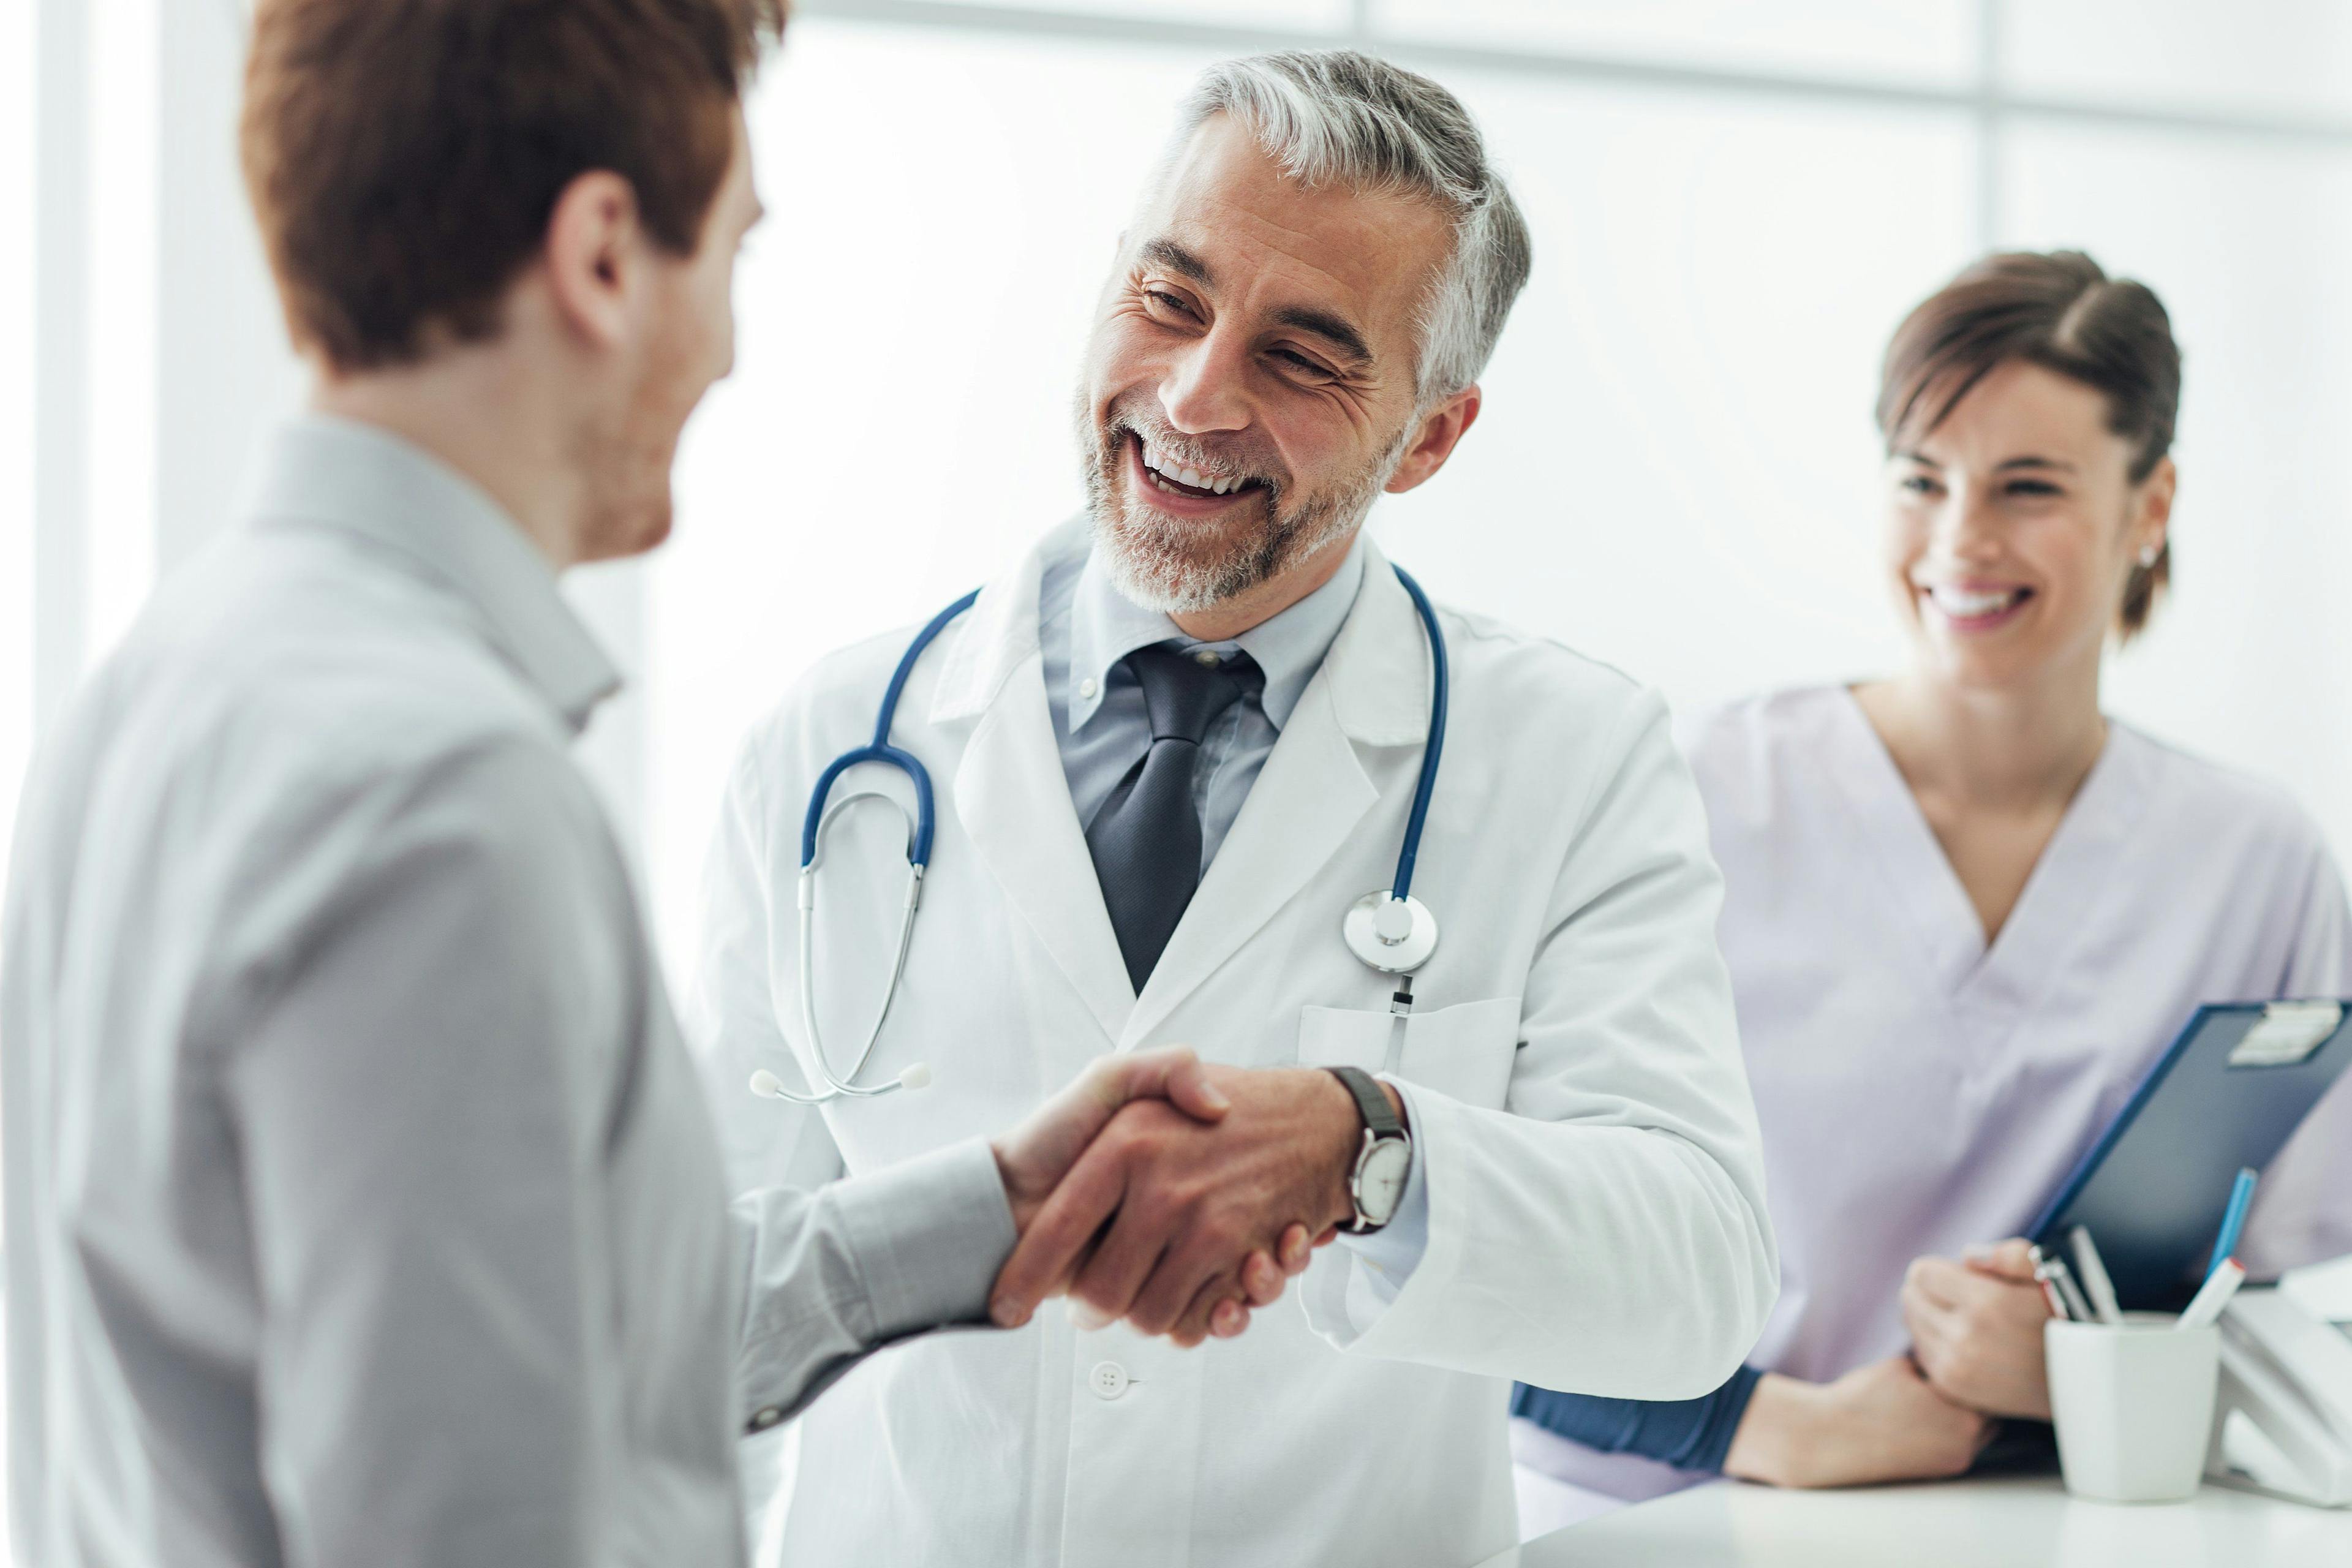 Physicians and patients working together can make a difference